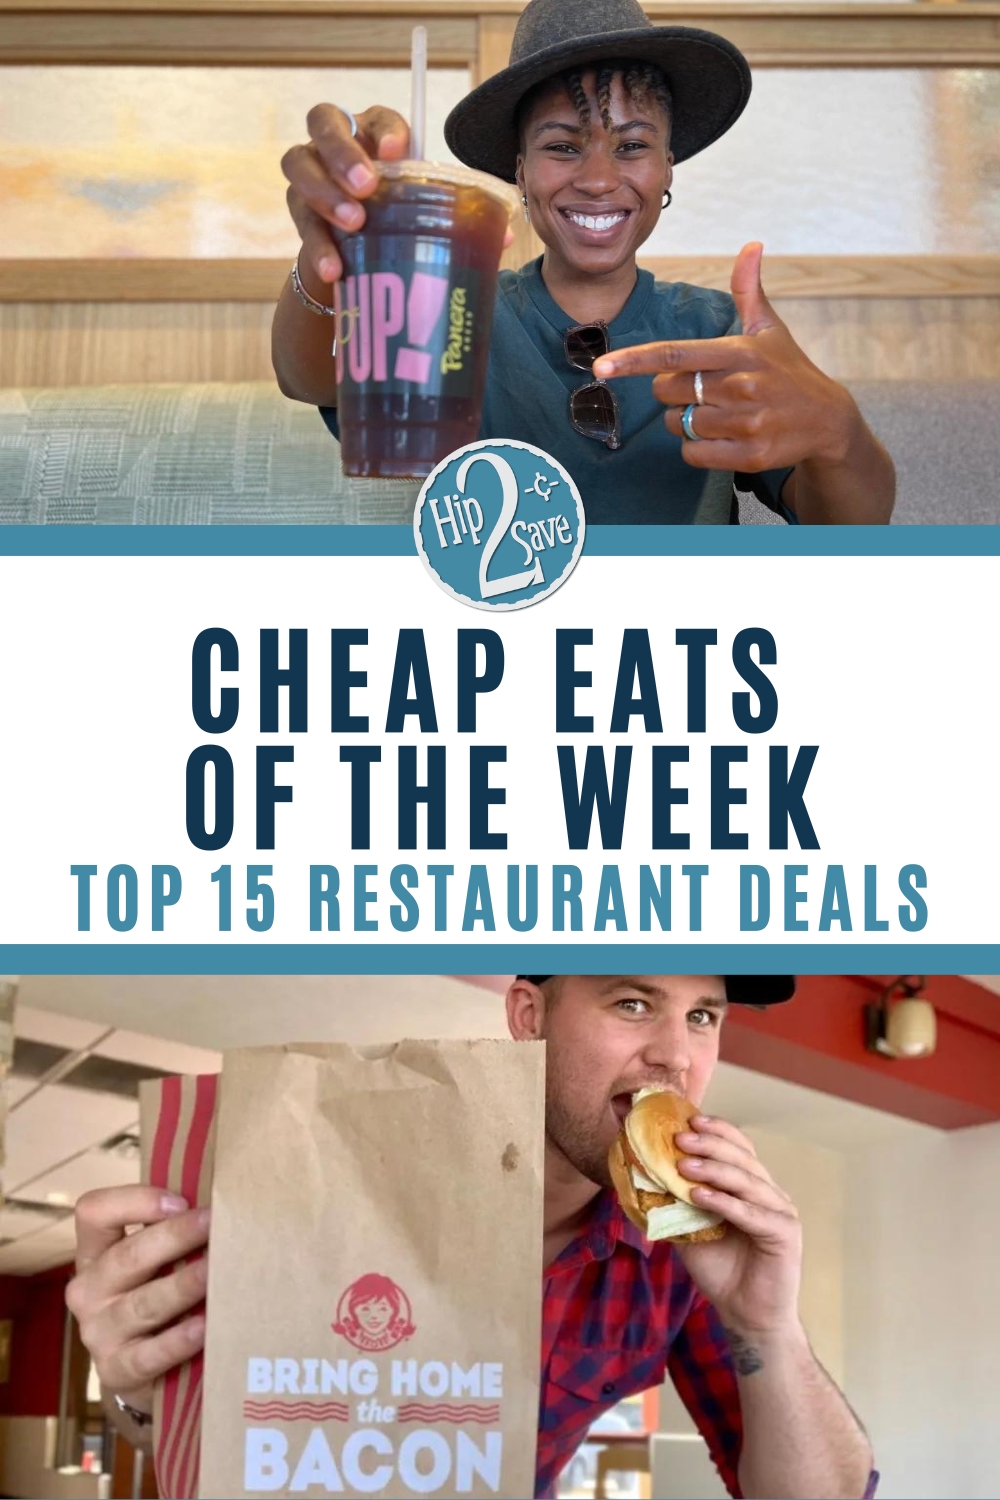 Discounted food deals